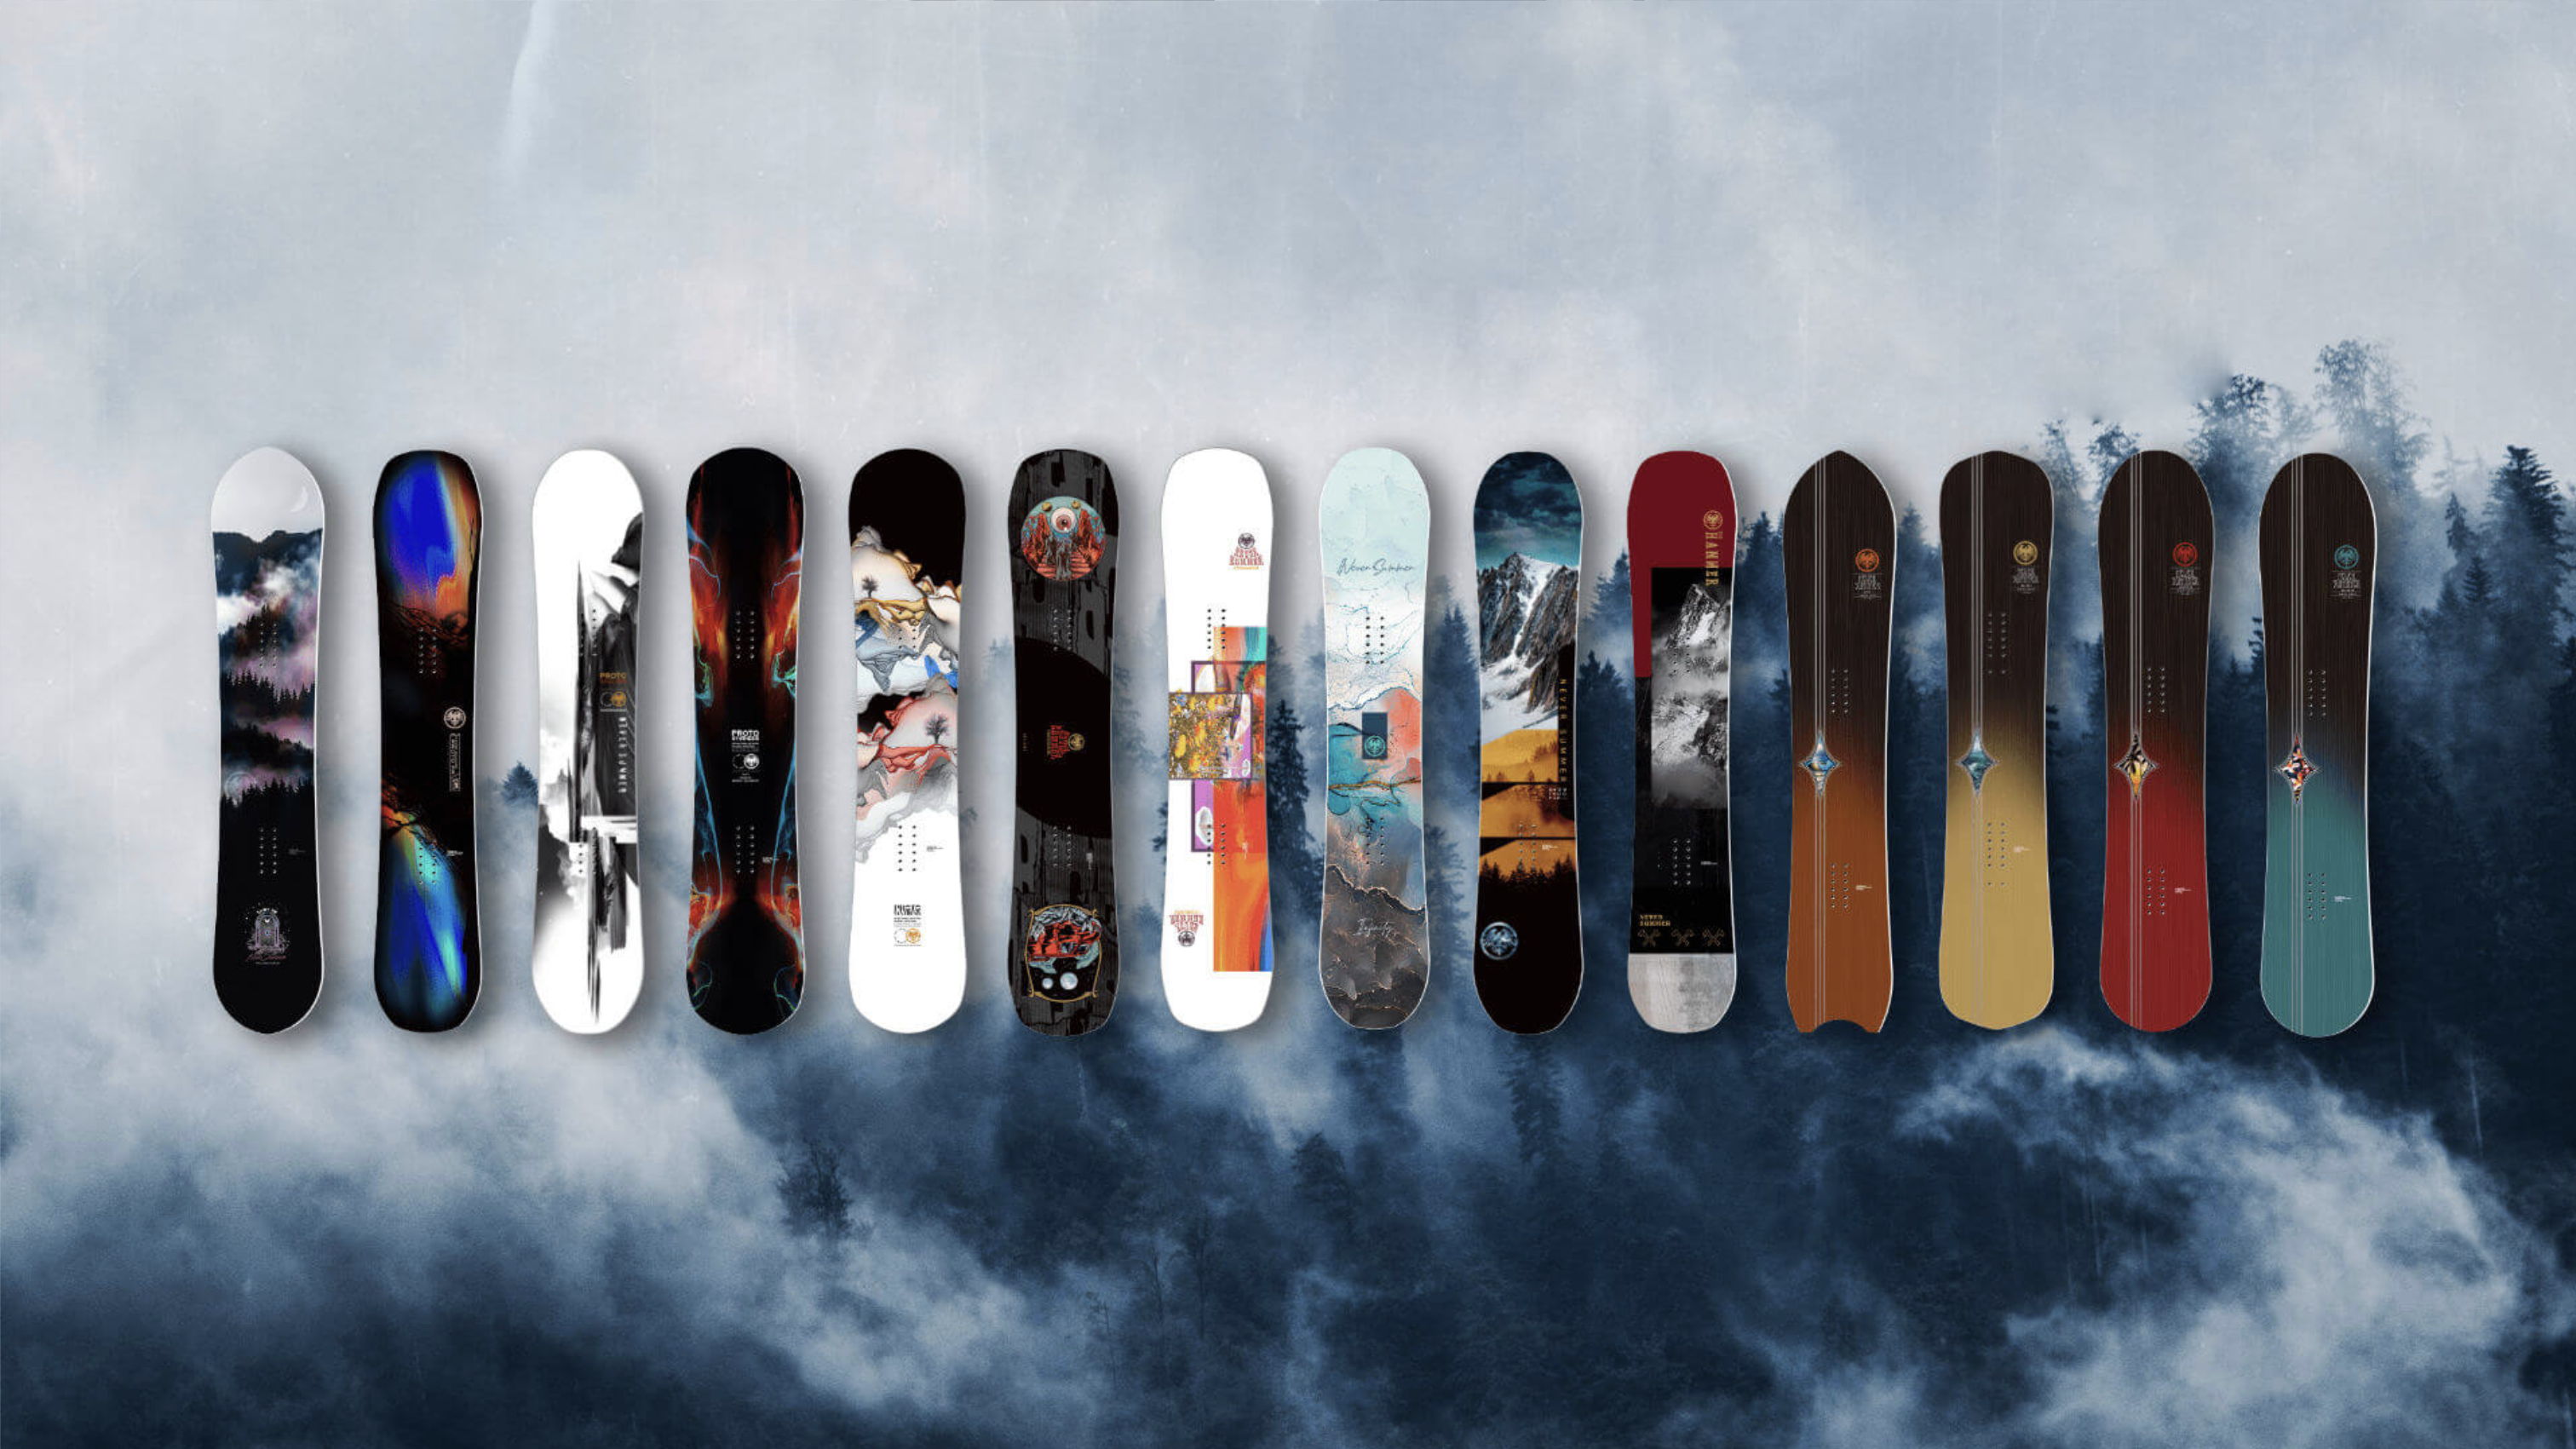 Snowboard Camber: The history of snowboard camber types and how they ride